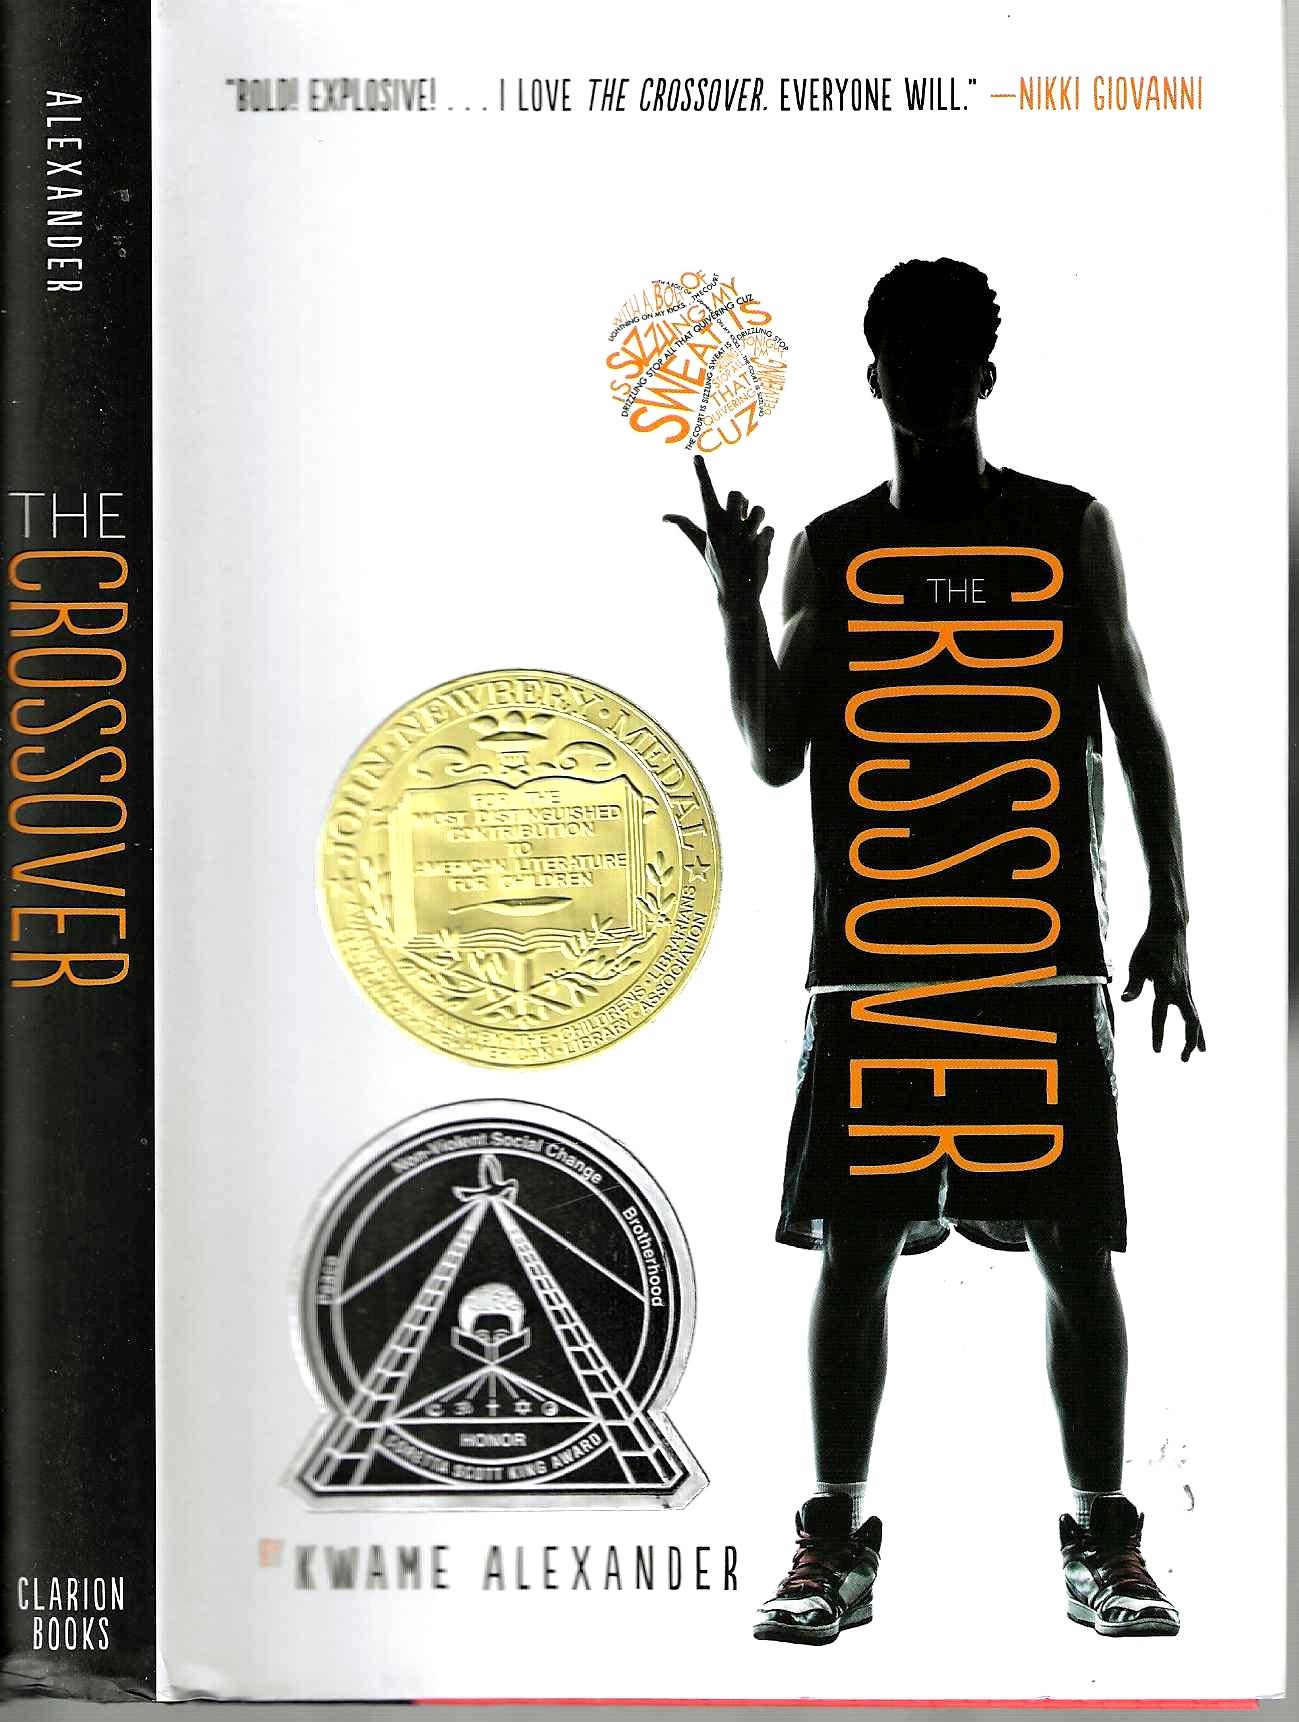 The Crossover by Kwame Alexander on Black's Bookshop